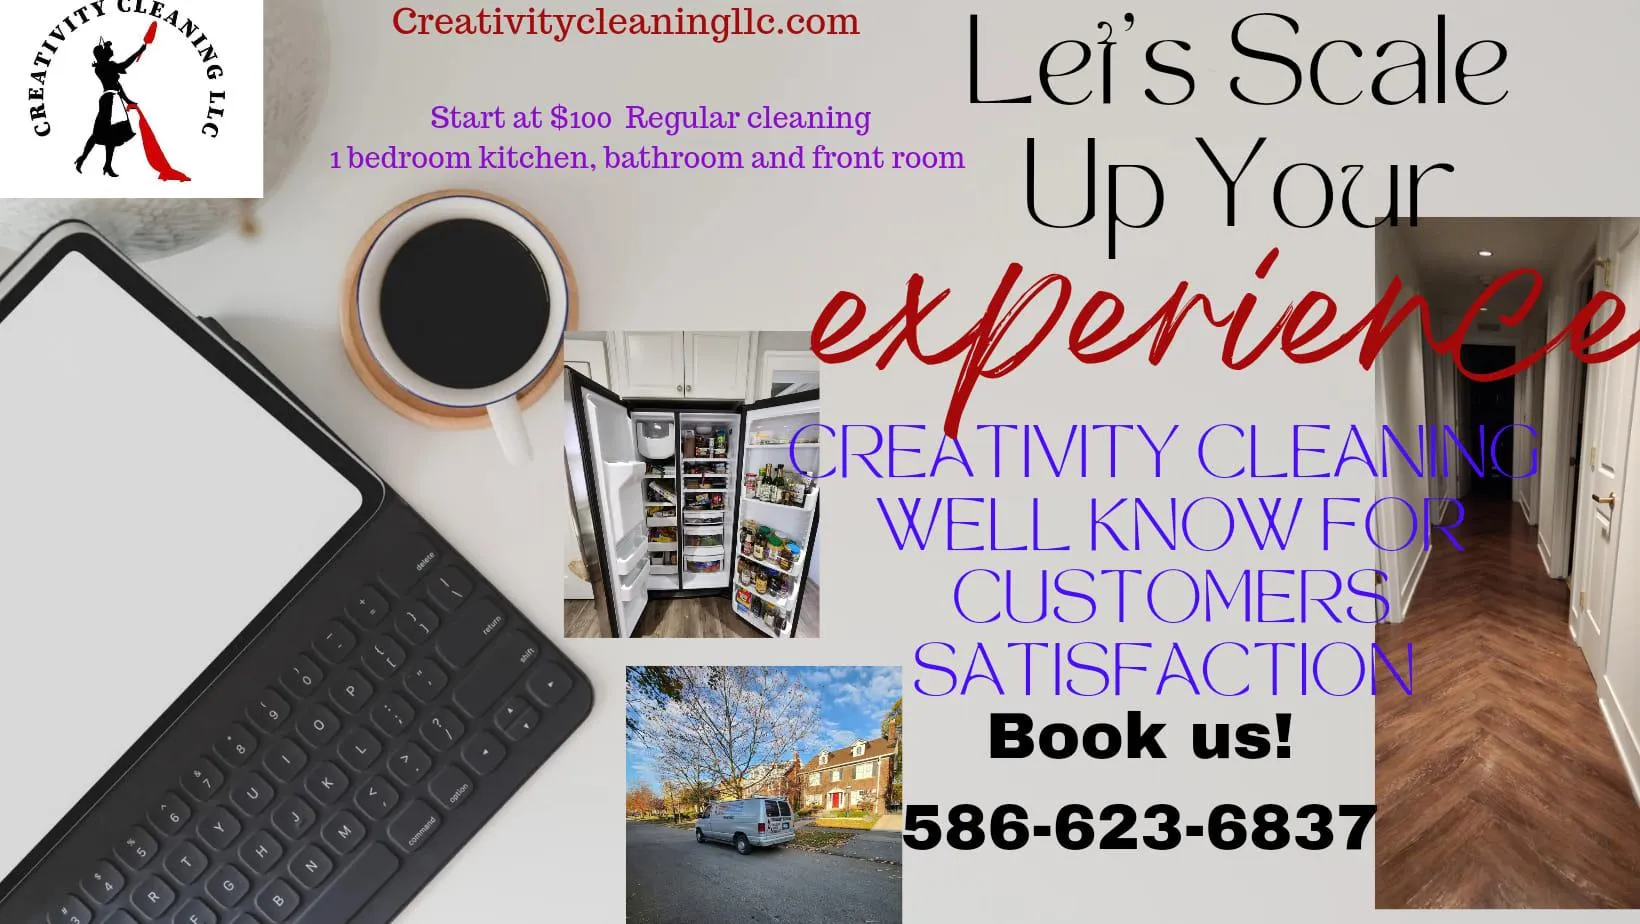 Residential & Home Cleaning for Creativity Cleaning LLC in Warren, MI